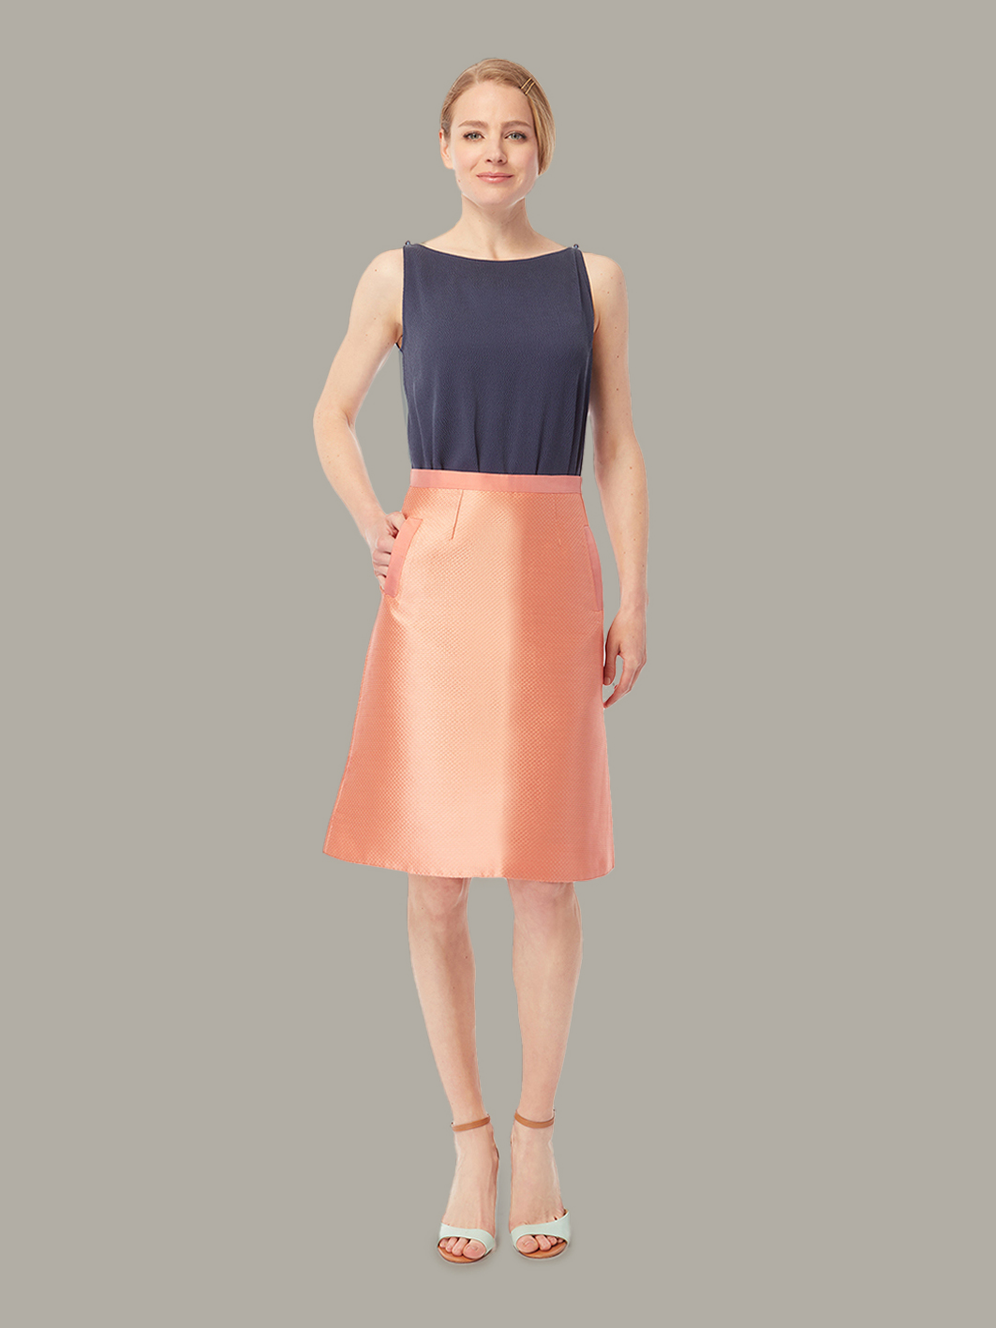 Front view of high-waist a-line skirt in peach blush, available from British sustainable fashion brand DEPLOY